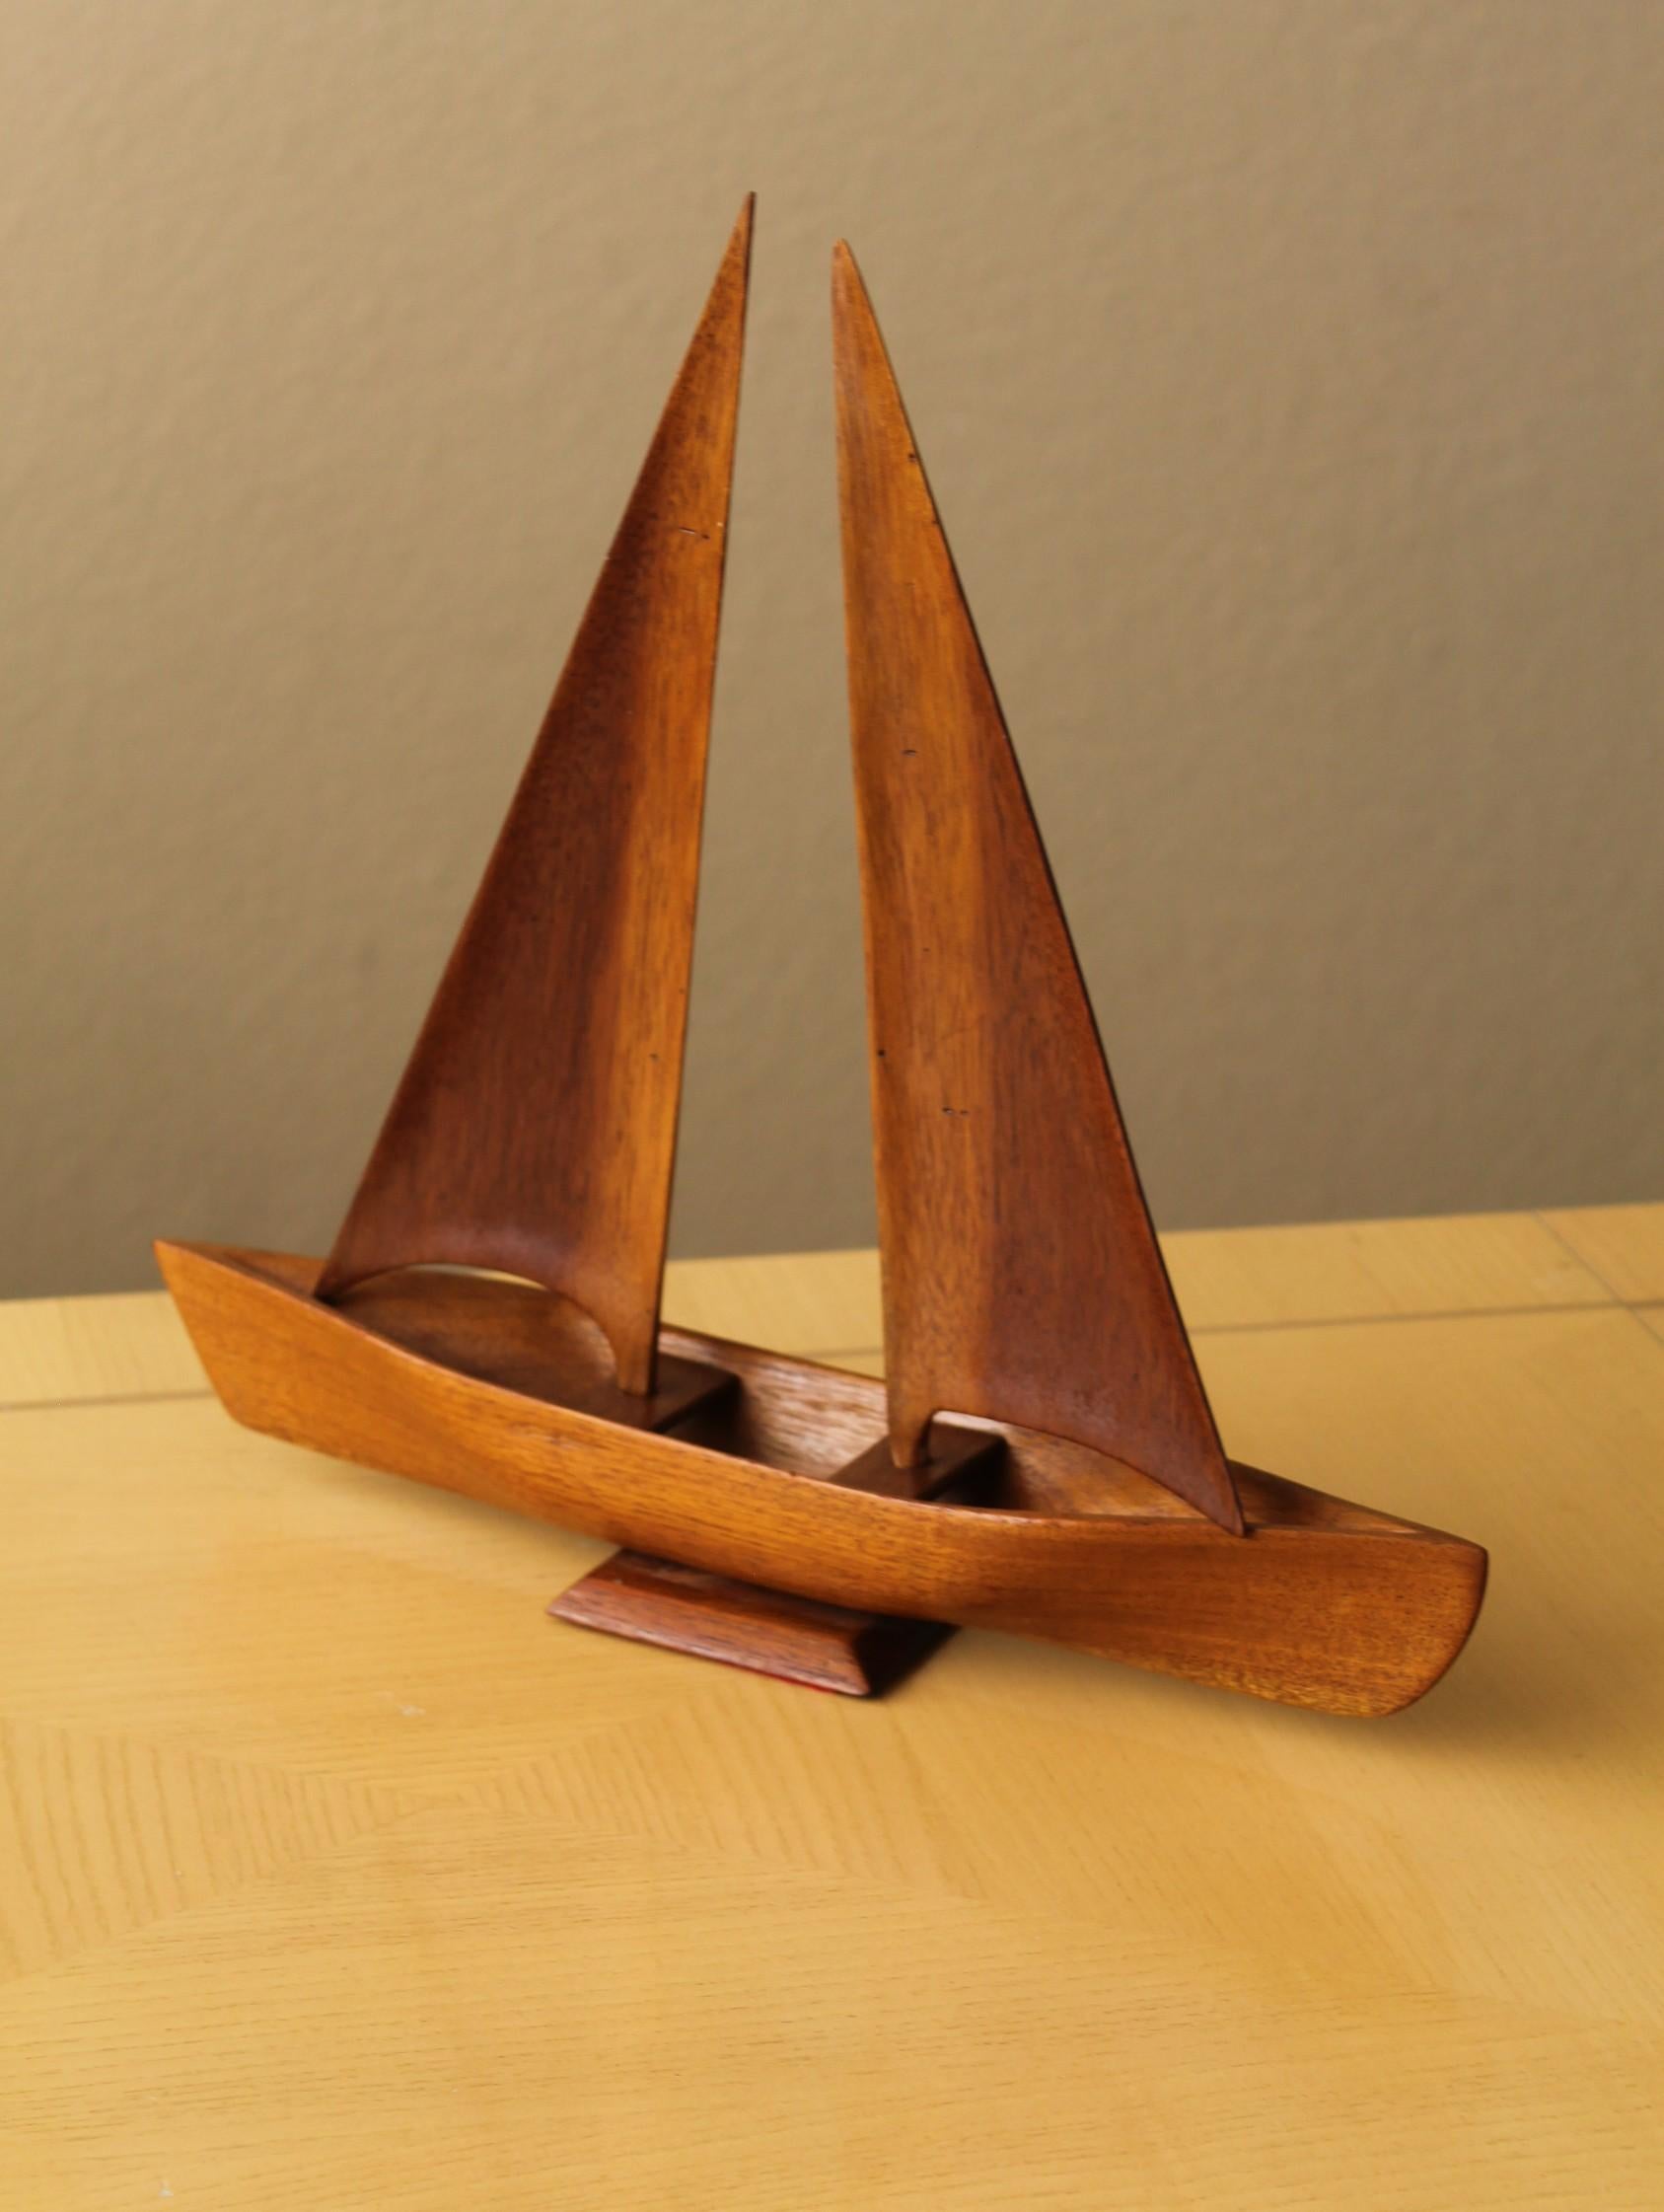 Immaculate!

Danish Modern
Teak Sail boat Sculpture
With Removable/Articulating Sails

Circa 1960

Here is a simply fabulous Danish Modern teak sail boat sculpture!  Incredible workmanship and gorgeous teak make for an incredible presentation!

This